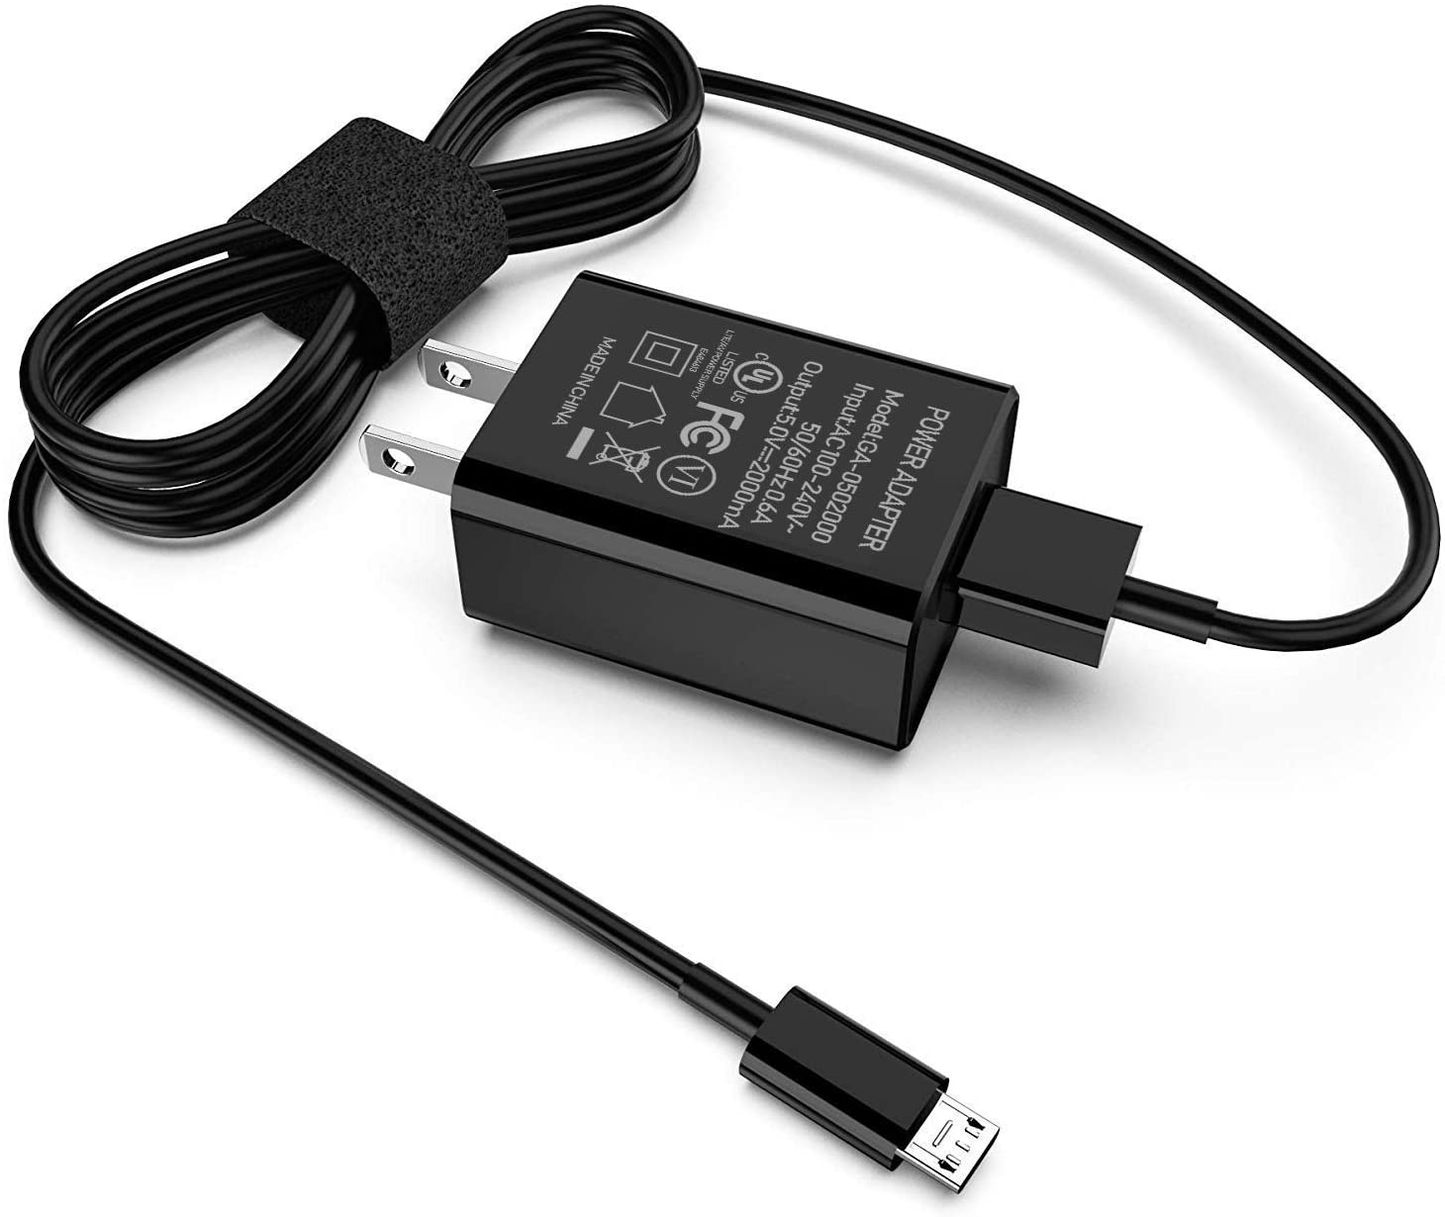 Kindle Fire Fast Charger [UL Listed] Fotbor AC Adapter 2A Rapid Charger with 6.6Ft Micro-USB Cable for Kindle Fire 7 HD 8 10 Tablet, Kids Edition,Kindle Fire HD HDX 7” 8.9”, Fire Phone (Black)